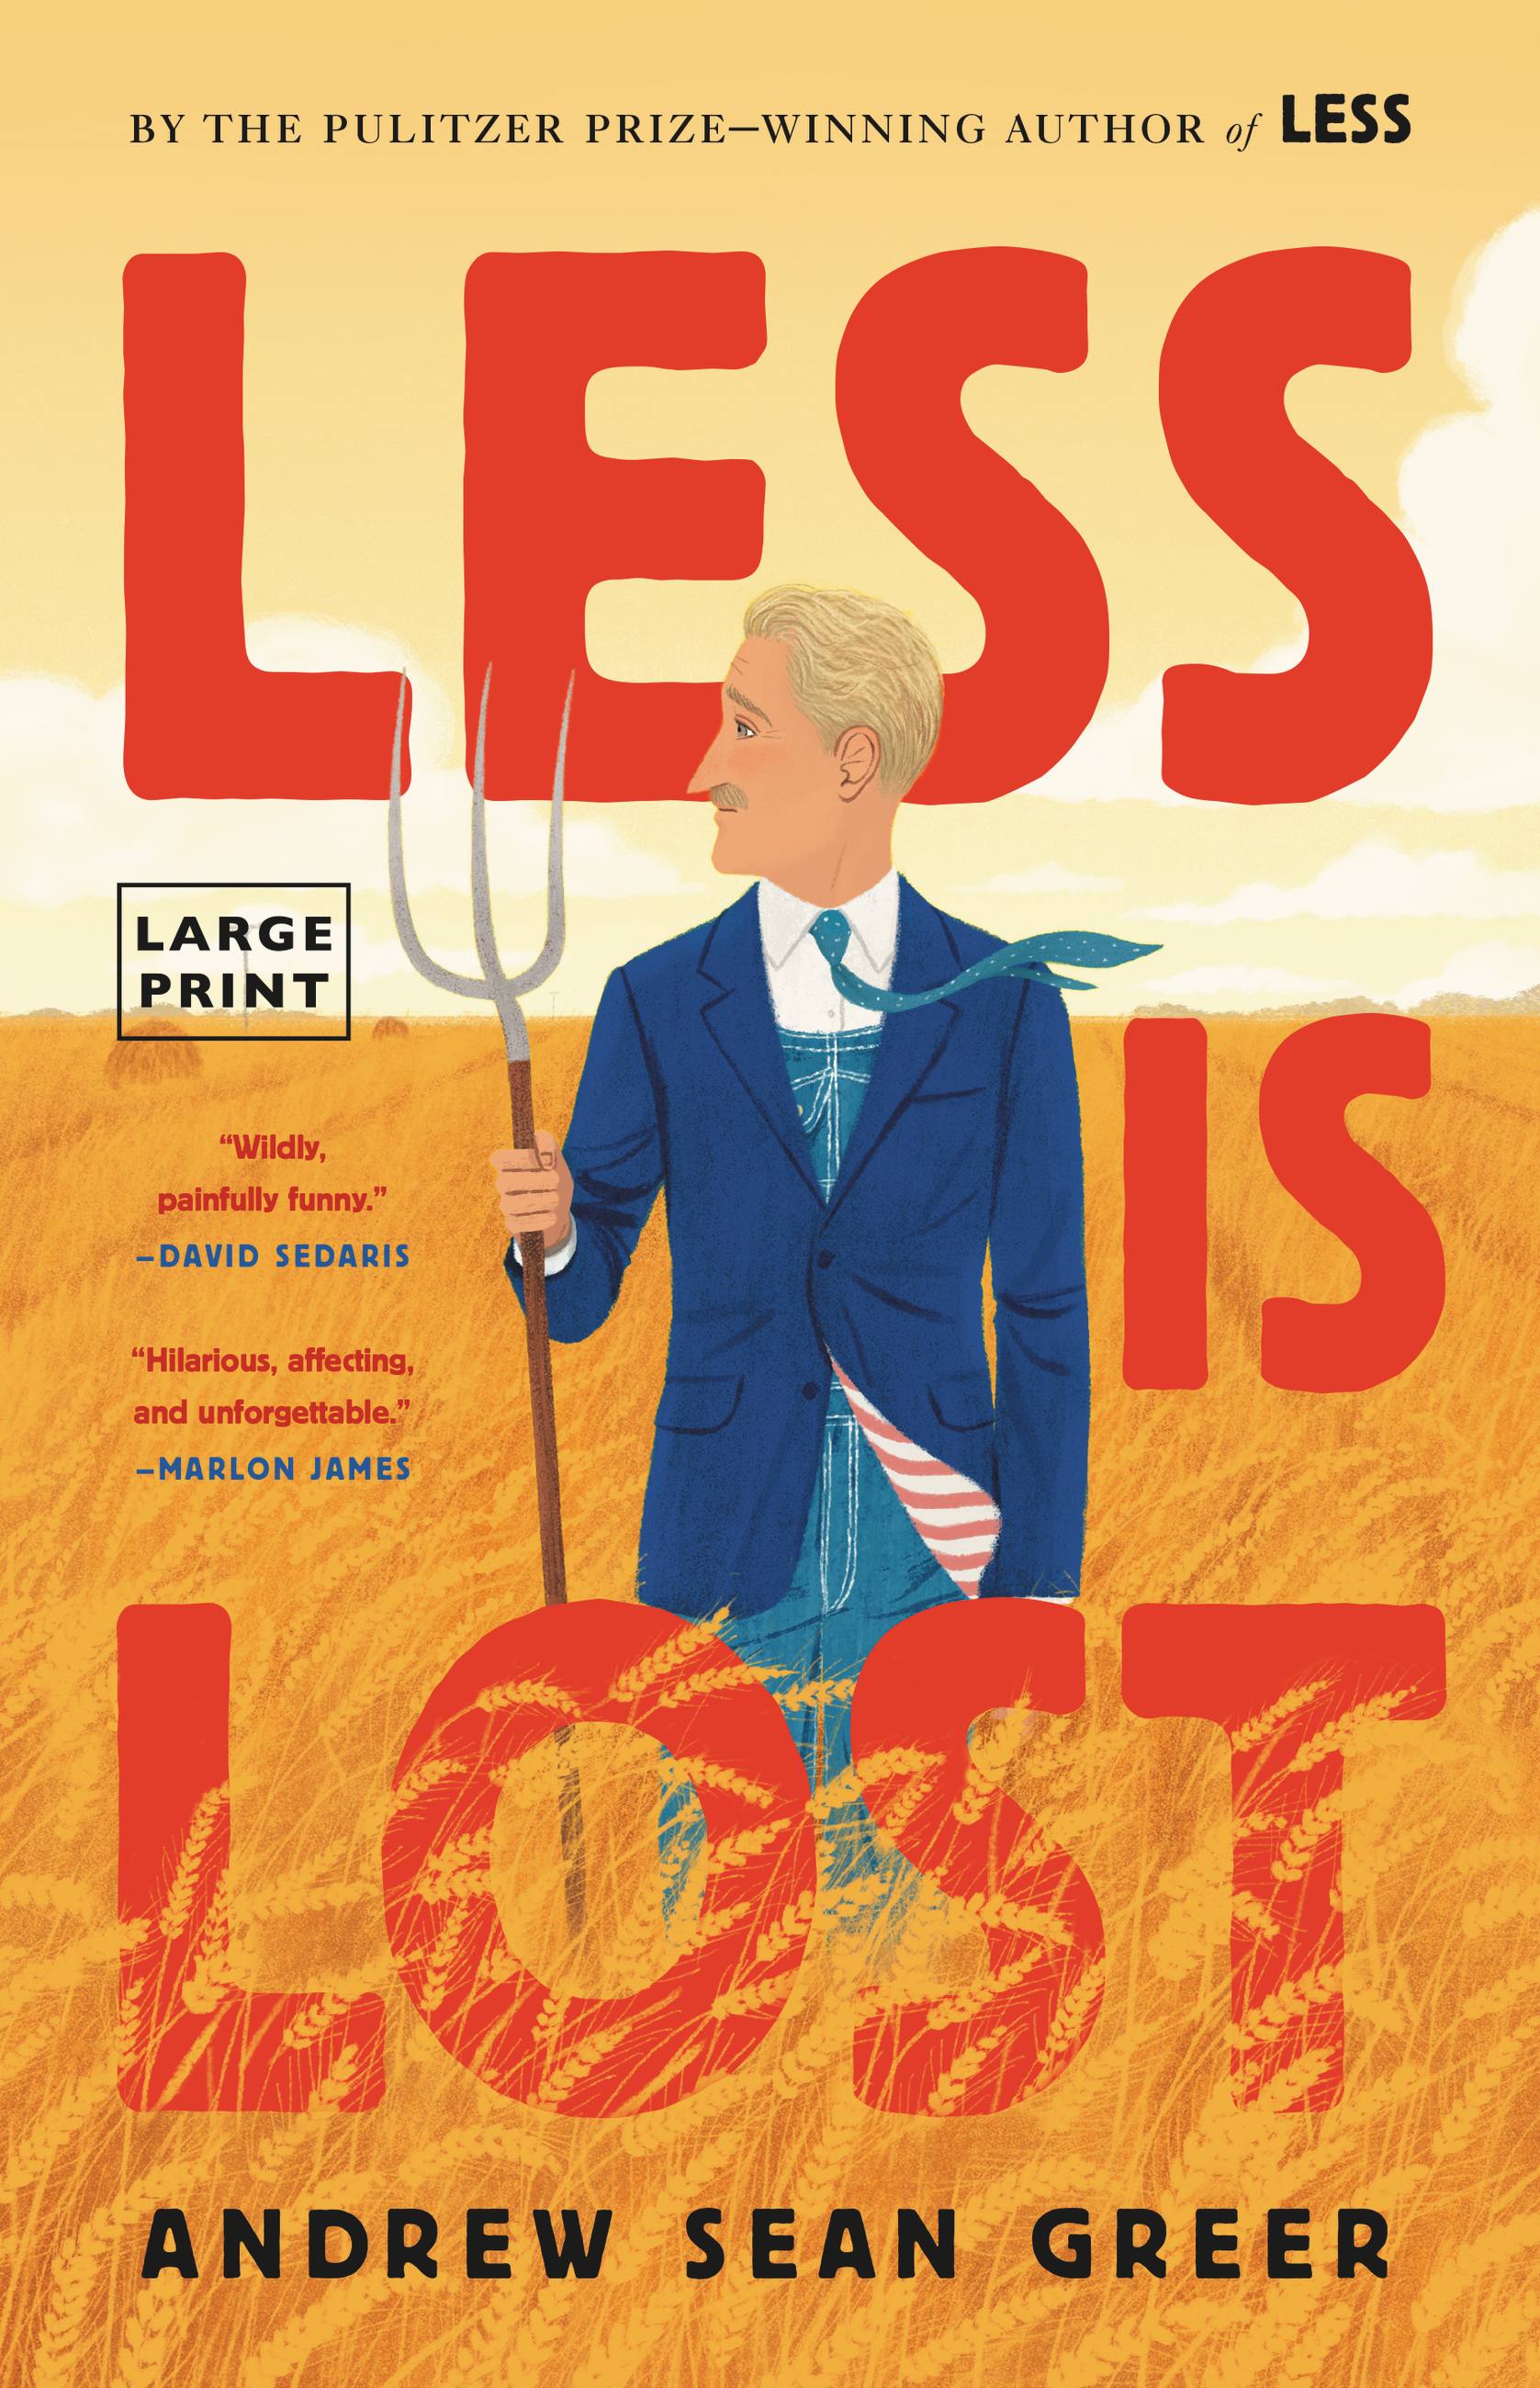 Lost　Book　Less　Is　Hachette　Sean　by　Greer　Andrew　Group